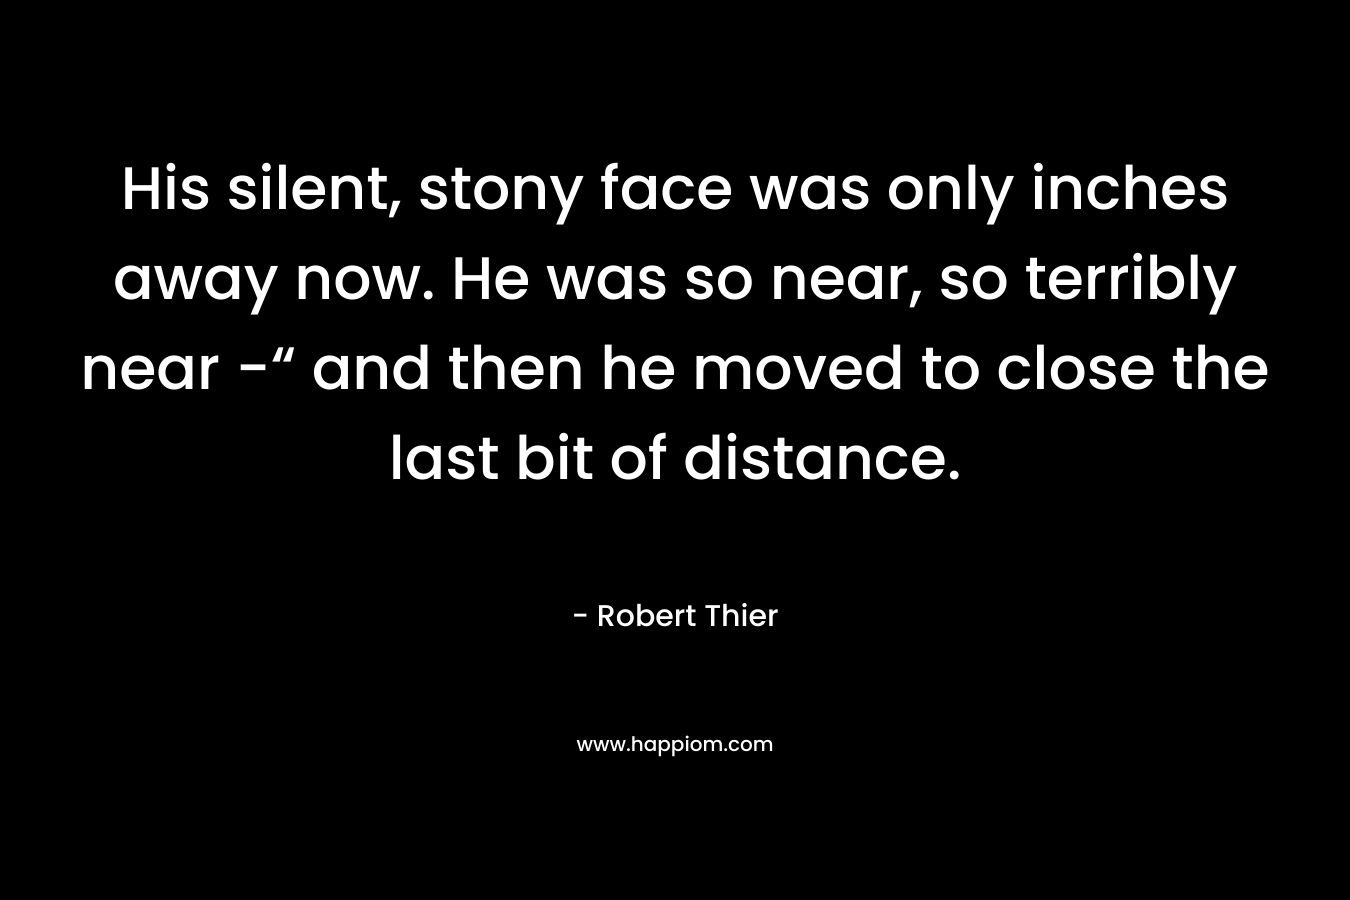 His silent, stony face was only inches away now. He was so near, so terribly near -“ and then he moved to close the last bit of distance.